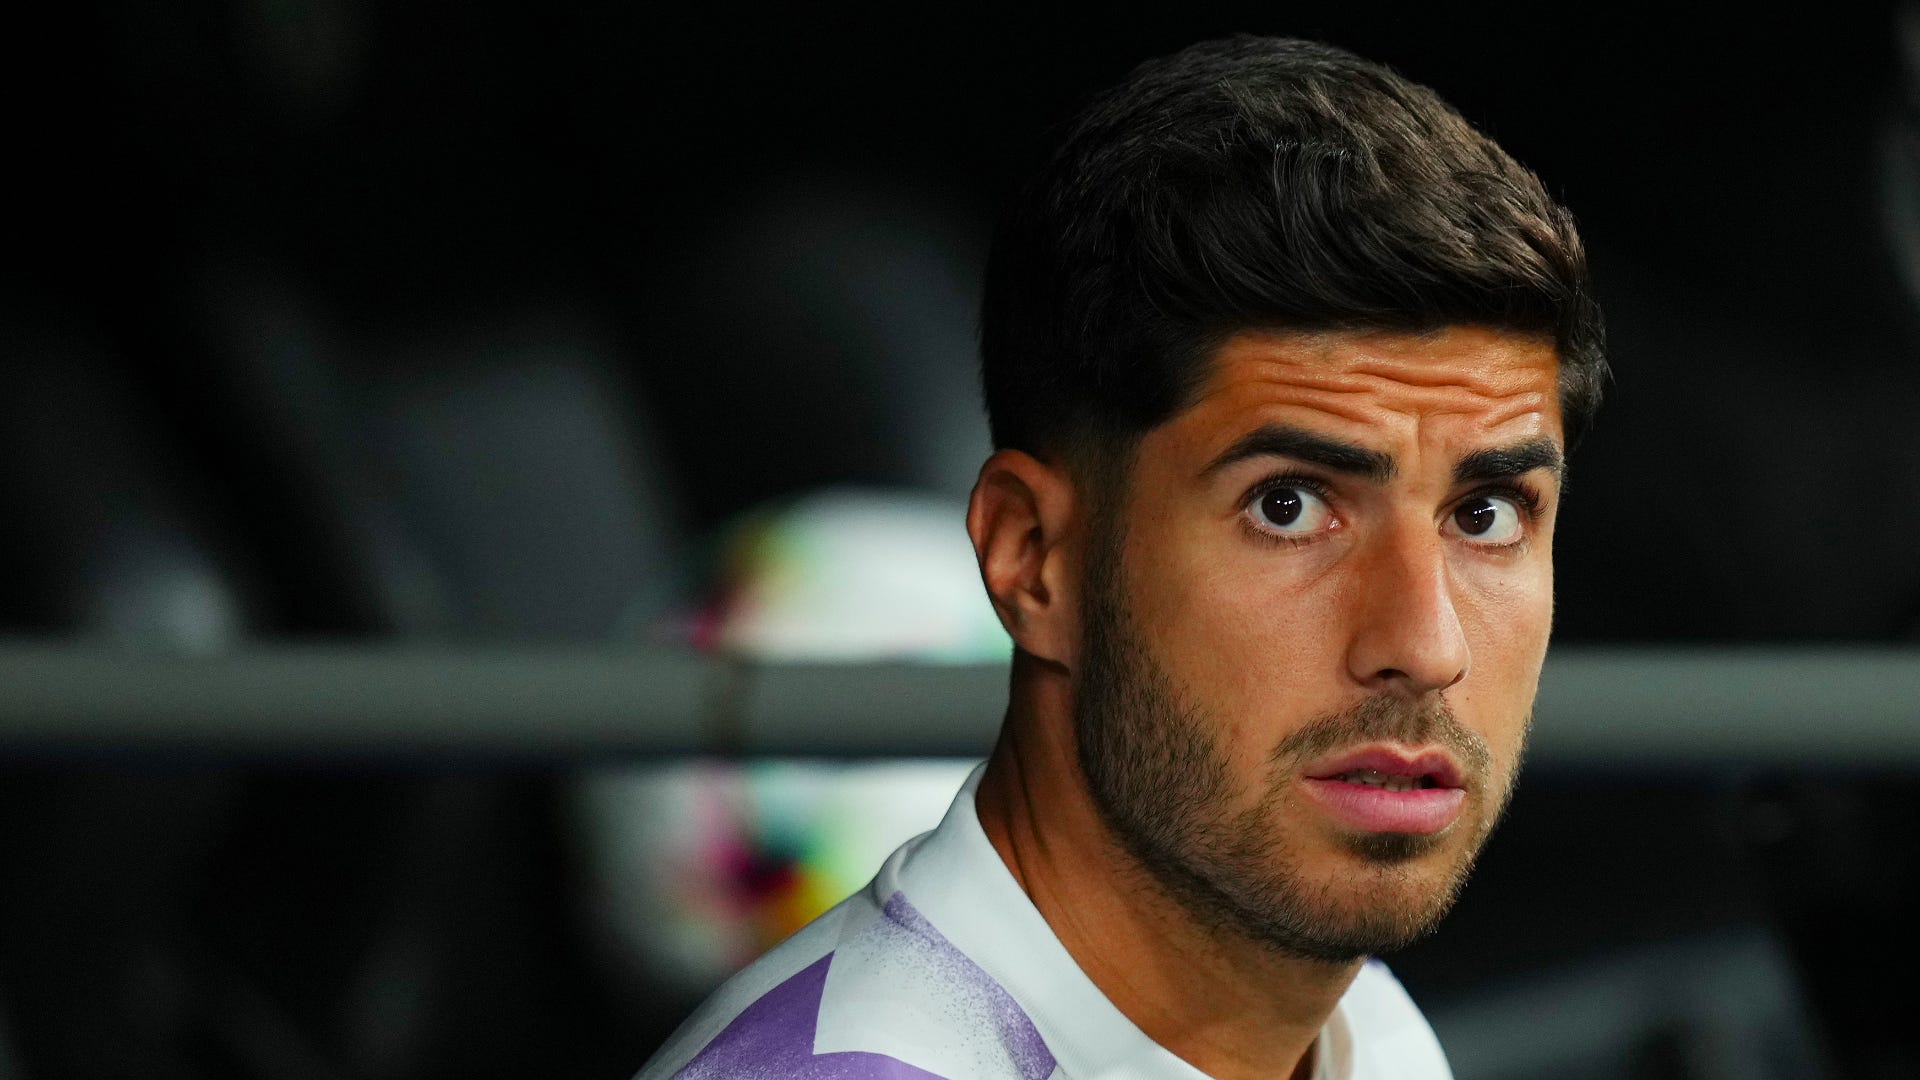 Asensio reacts to Barcelona transfer links as Real Madrid star opens up on  contract uncertainty  US